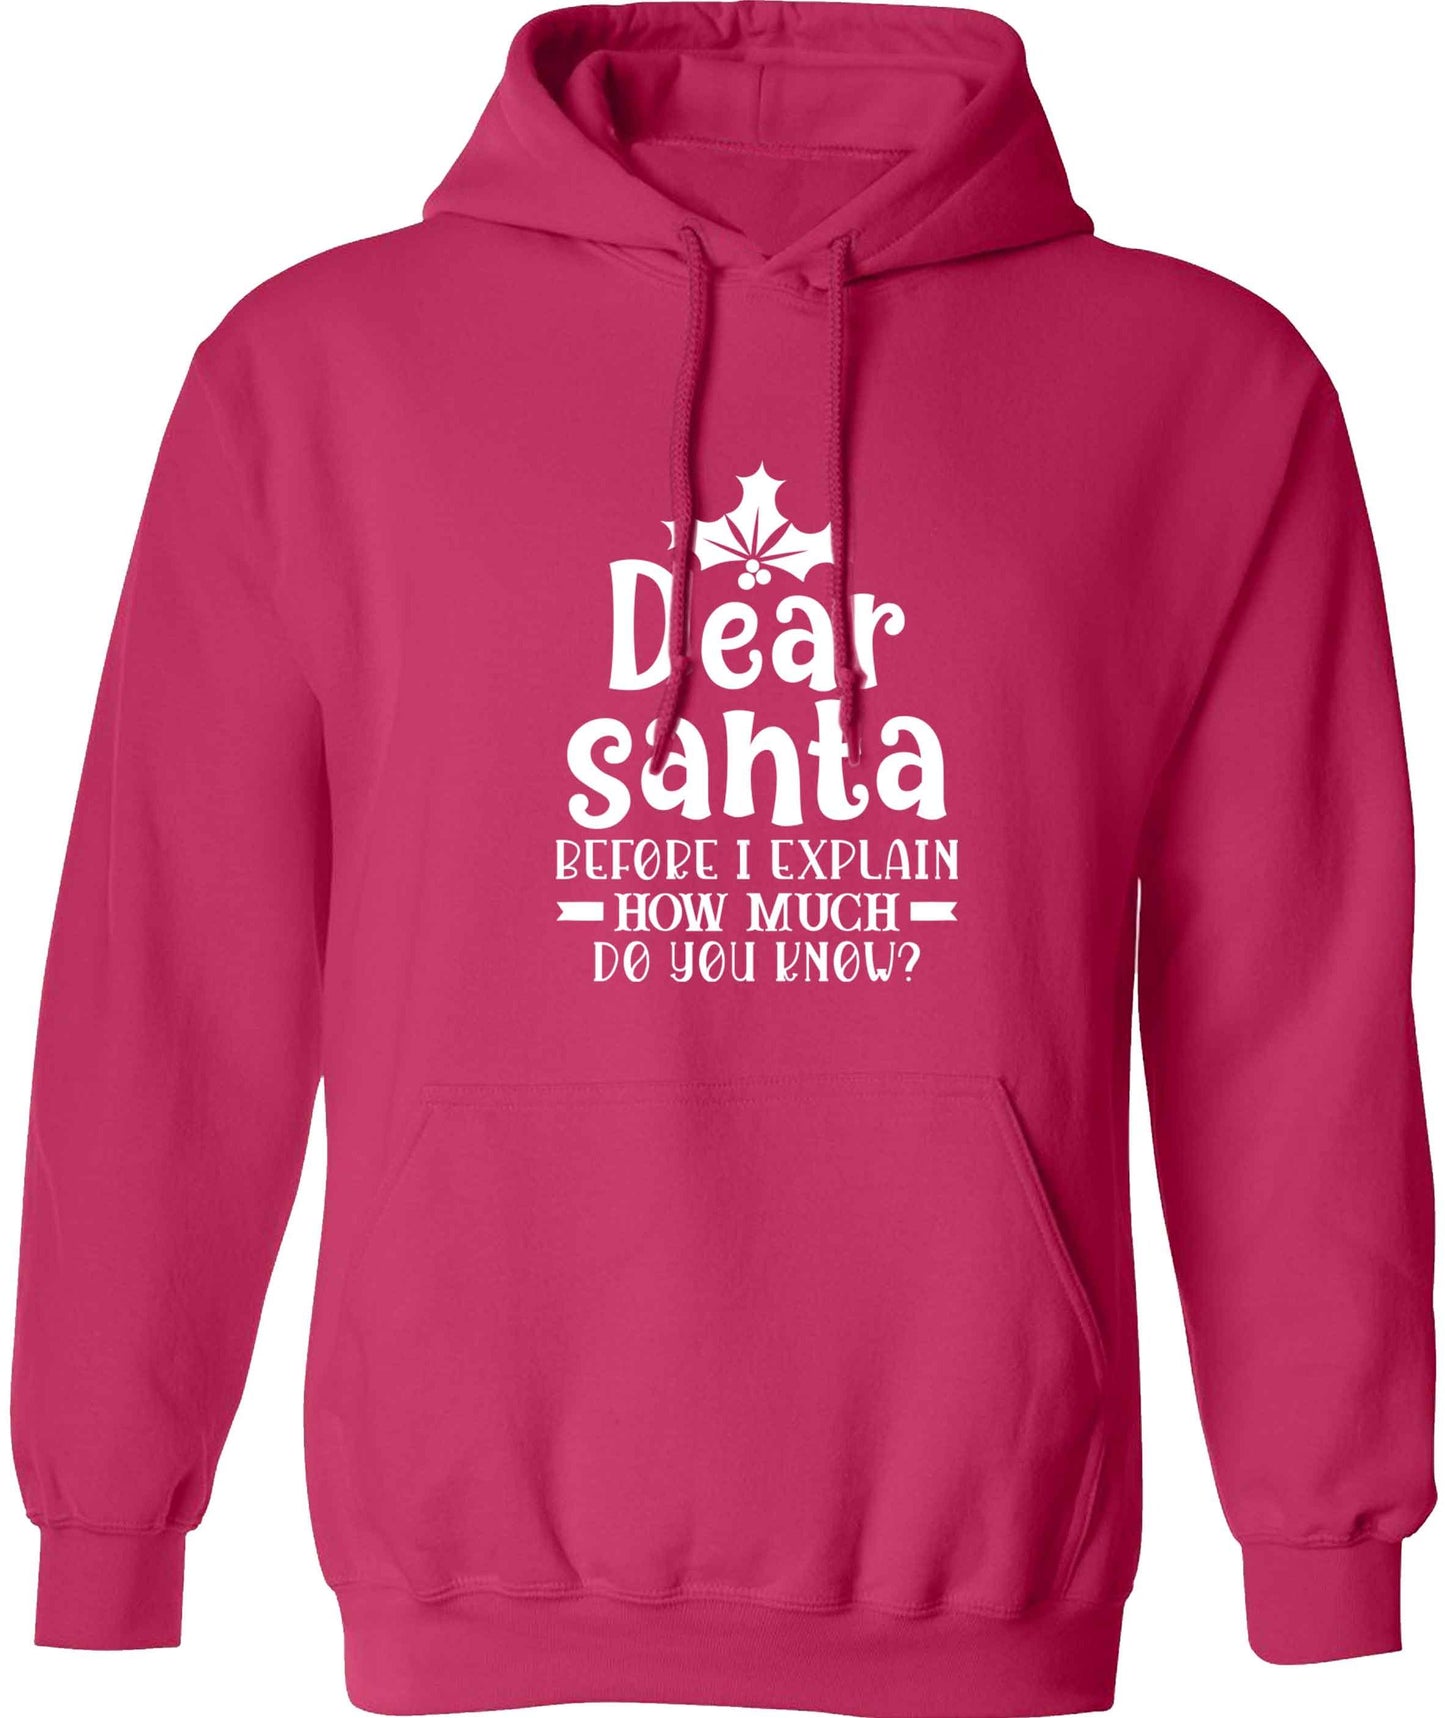 Santa before I explain how much do you know? adults unisex pink hoodie 2XL